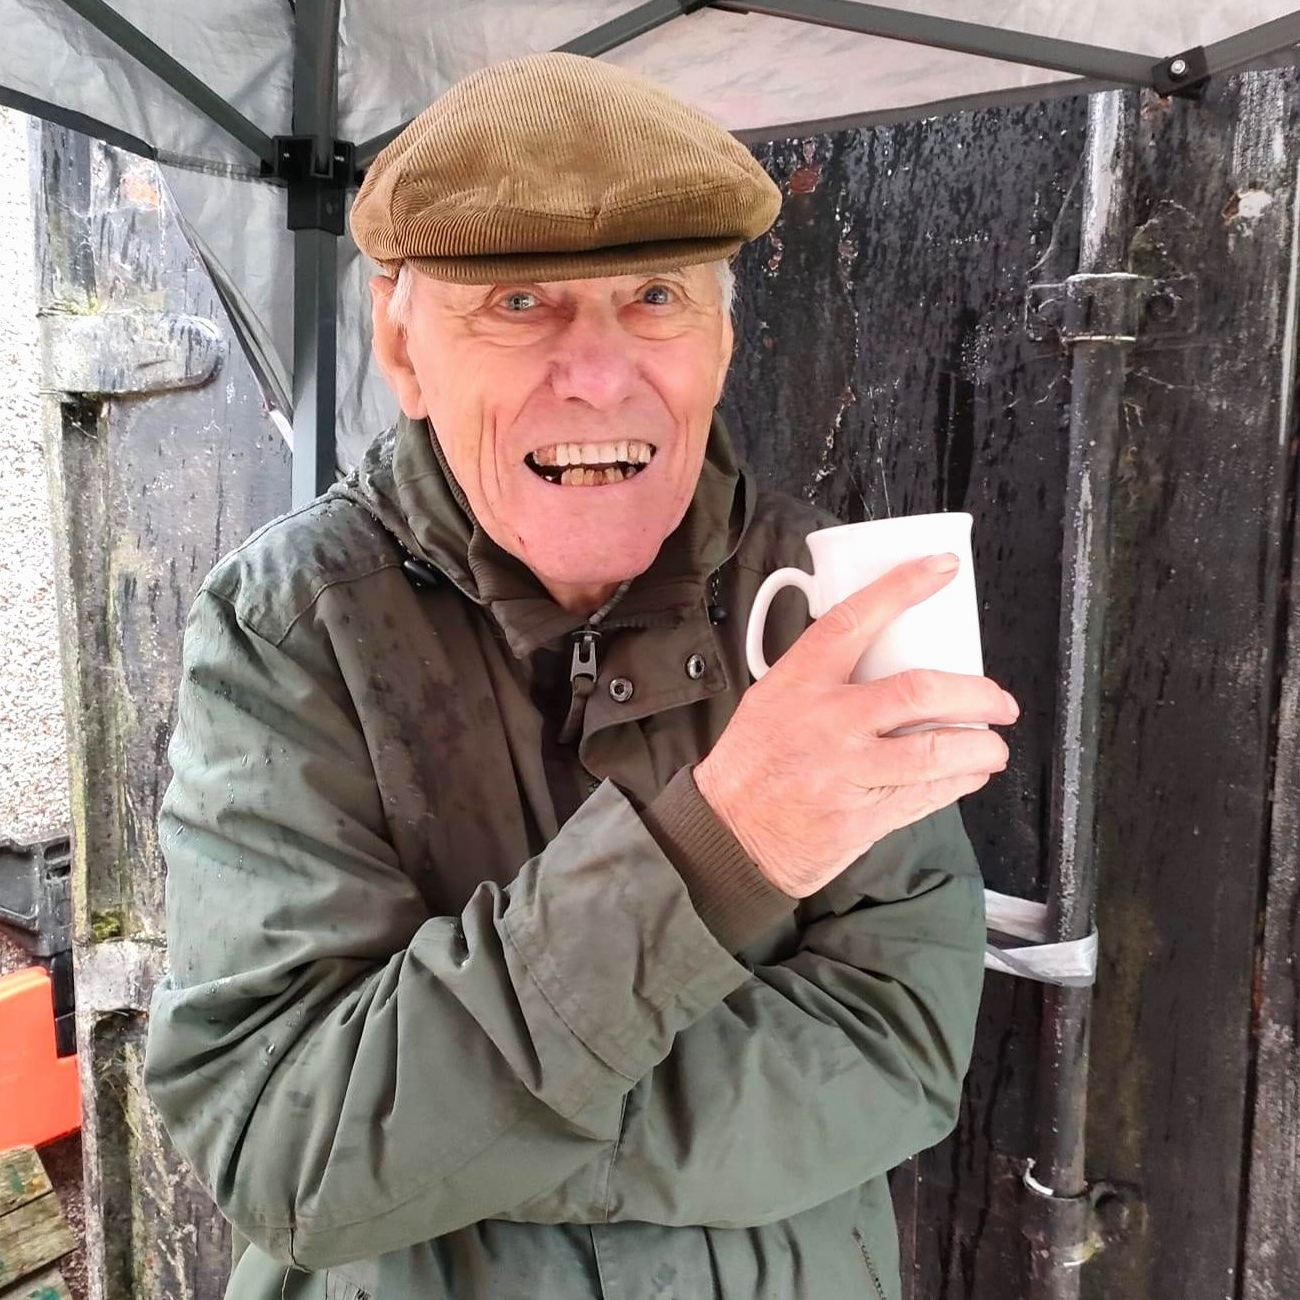 Michael, wearing green coat and brown corduroy flat hat, stands outside under a gazebo holding a hot drink and smiles for the camera